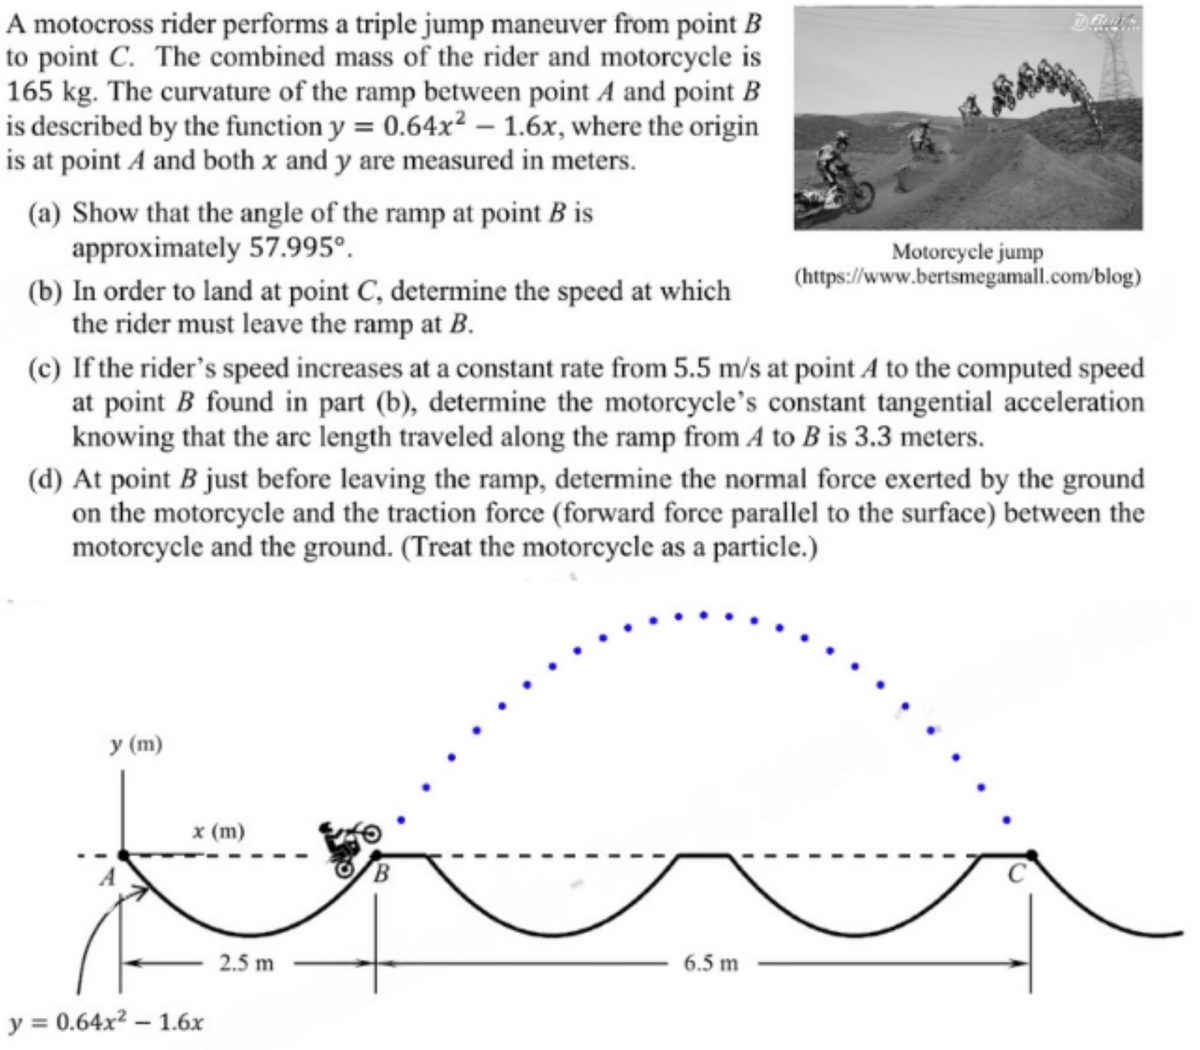 A motocross rider performs a triple jump maneuver from point B
to point C. The combined mass of the rider and motorcycle is
165 kg. The curvature of the ramp between point A and point B
is described by the function y = 0.64x² - 1.6x, where the origin
is at point A and both x and y are measured in meters.
(a) Show that the angle of the ramp at point B is
approximately 57.995°.
(b) In order to land at point C, determine the speed at which
the rider must leave the ramp at B.
Motorcycle jump
(https://www.bertsmegamall.com/blog)
(c) If the rider's speed increases at a constant rate from 5.5 m/s at point A to the computed speed
at point B found in part (b), determine the motorcycle's constant tangential acceleration
knowing that the arc length traveled along the ramp from A to B is 3.3 meters.
(d) At point B just before leaving the ramp, determine the normal force exerted by the ground.
on the motorcycle and the traction force (forward force parallel to the surface) between the
motorcycle and the ground. (Treat the motorcycle as a particle.)
y (m)
x (m)
y = 0.64x²-1.6x
2.5 m
B
6.5 m